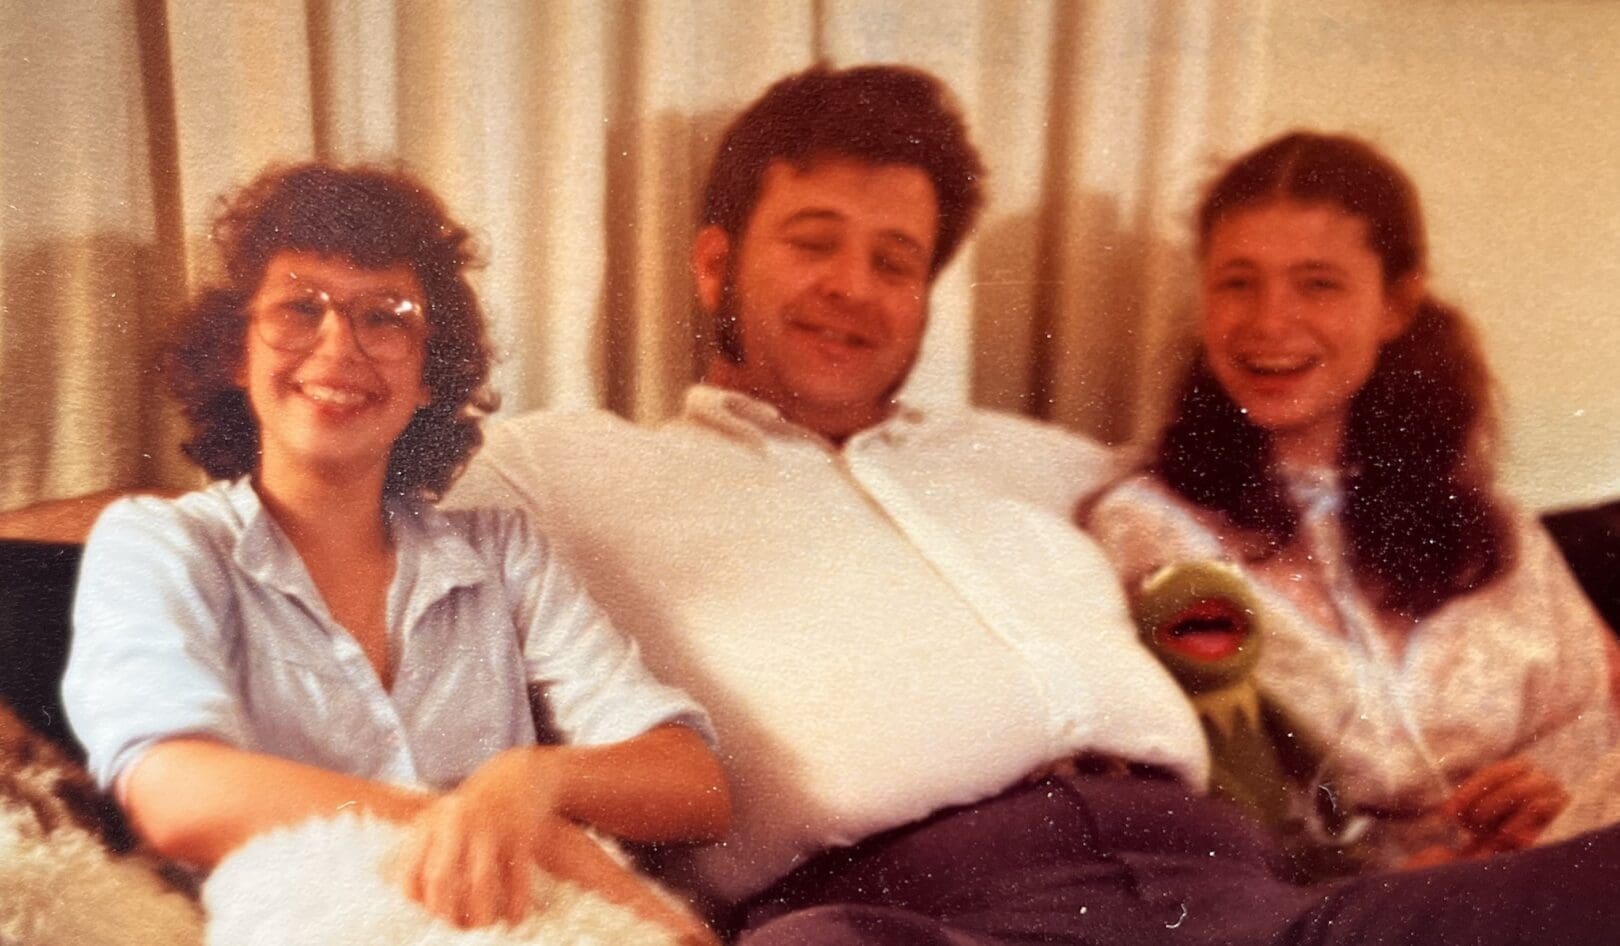 Two daughters sitting with their dad in the middle; the daughter on the left is wearing glasses